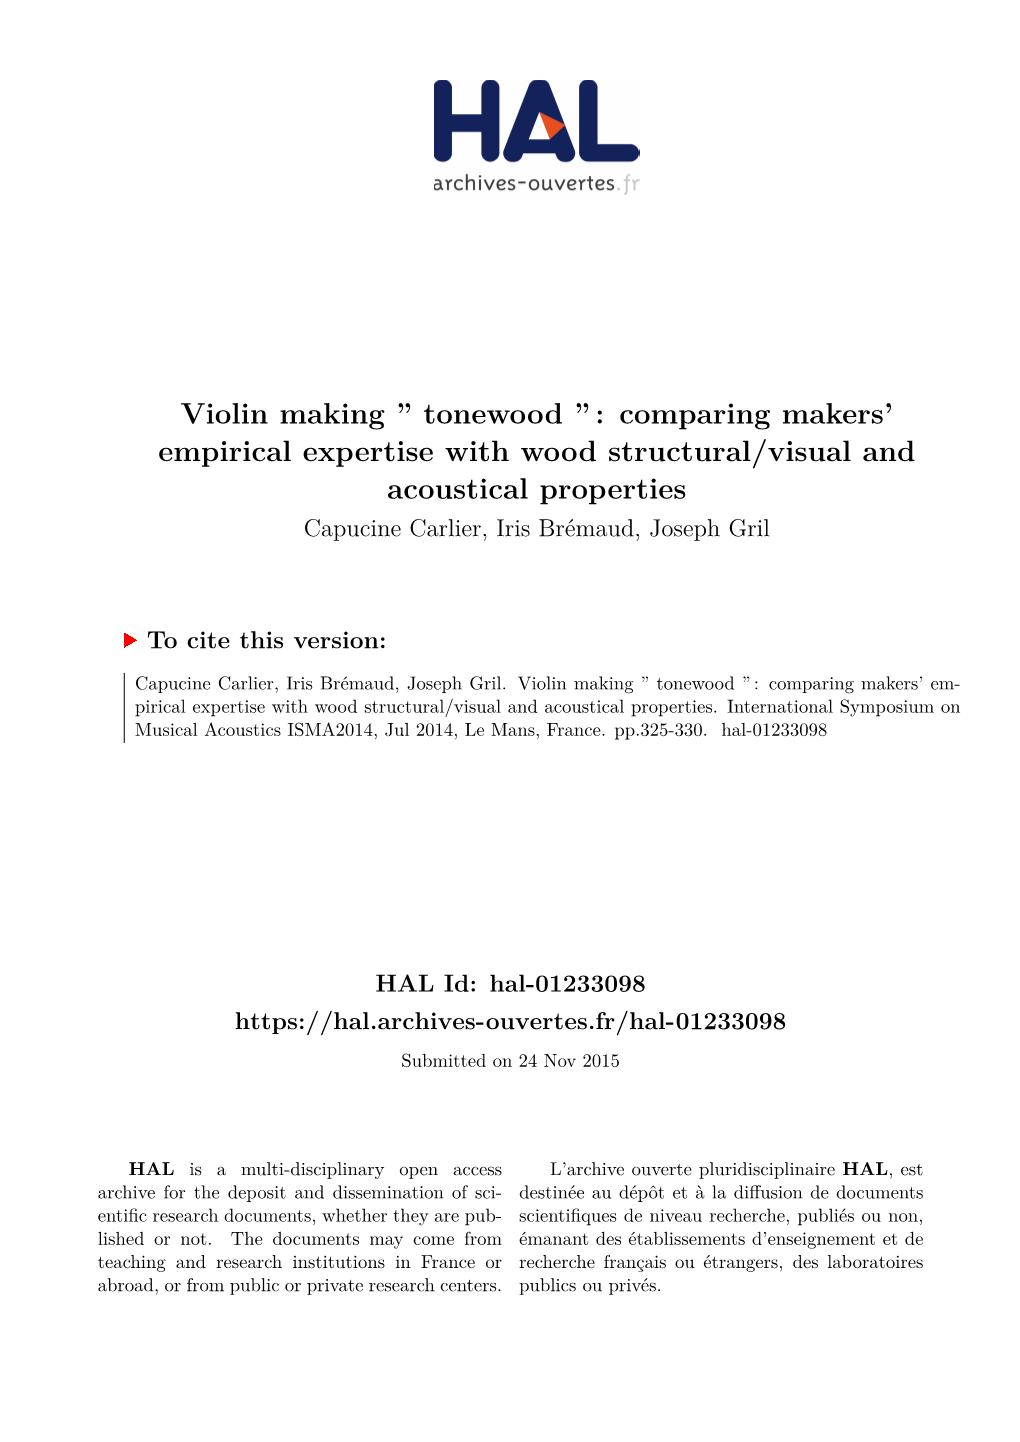 Violin Making '' Tonewood '': Comparing Makers' Empirical Expertise With